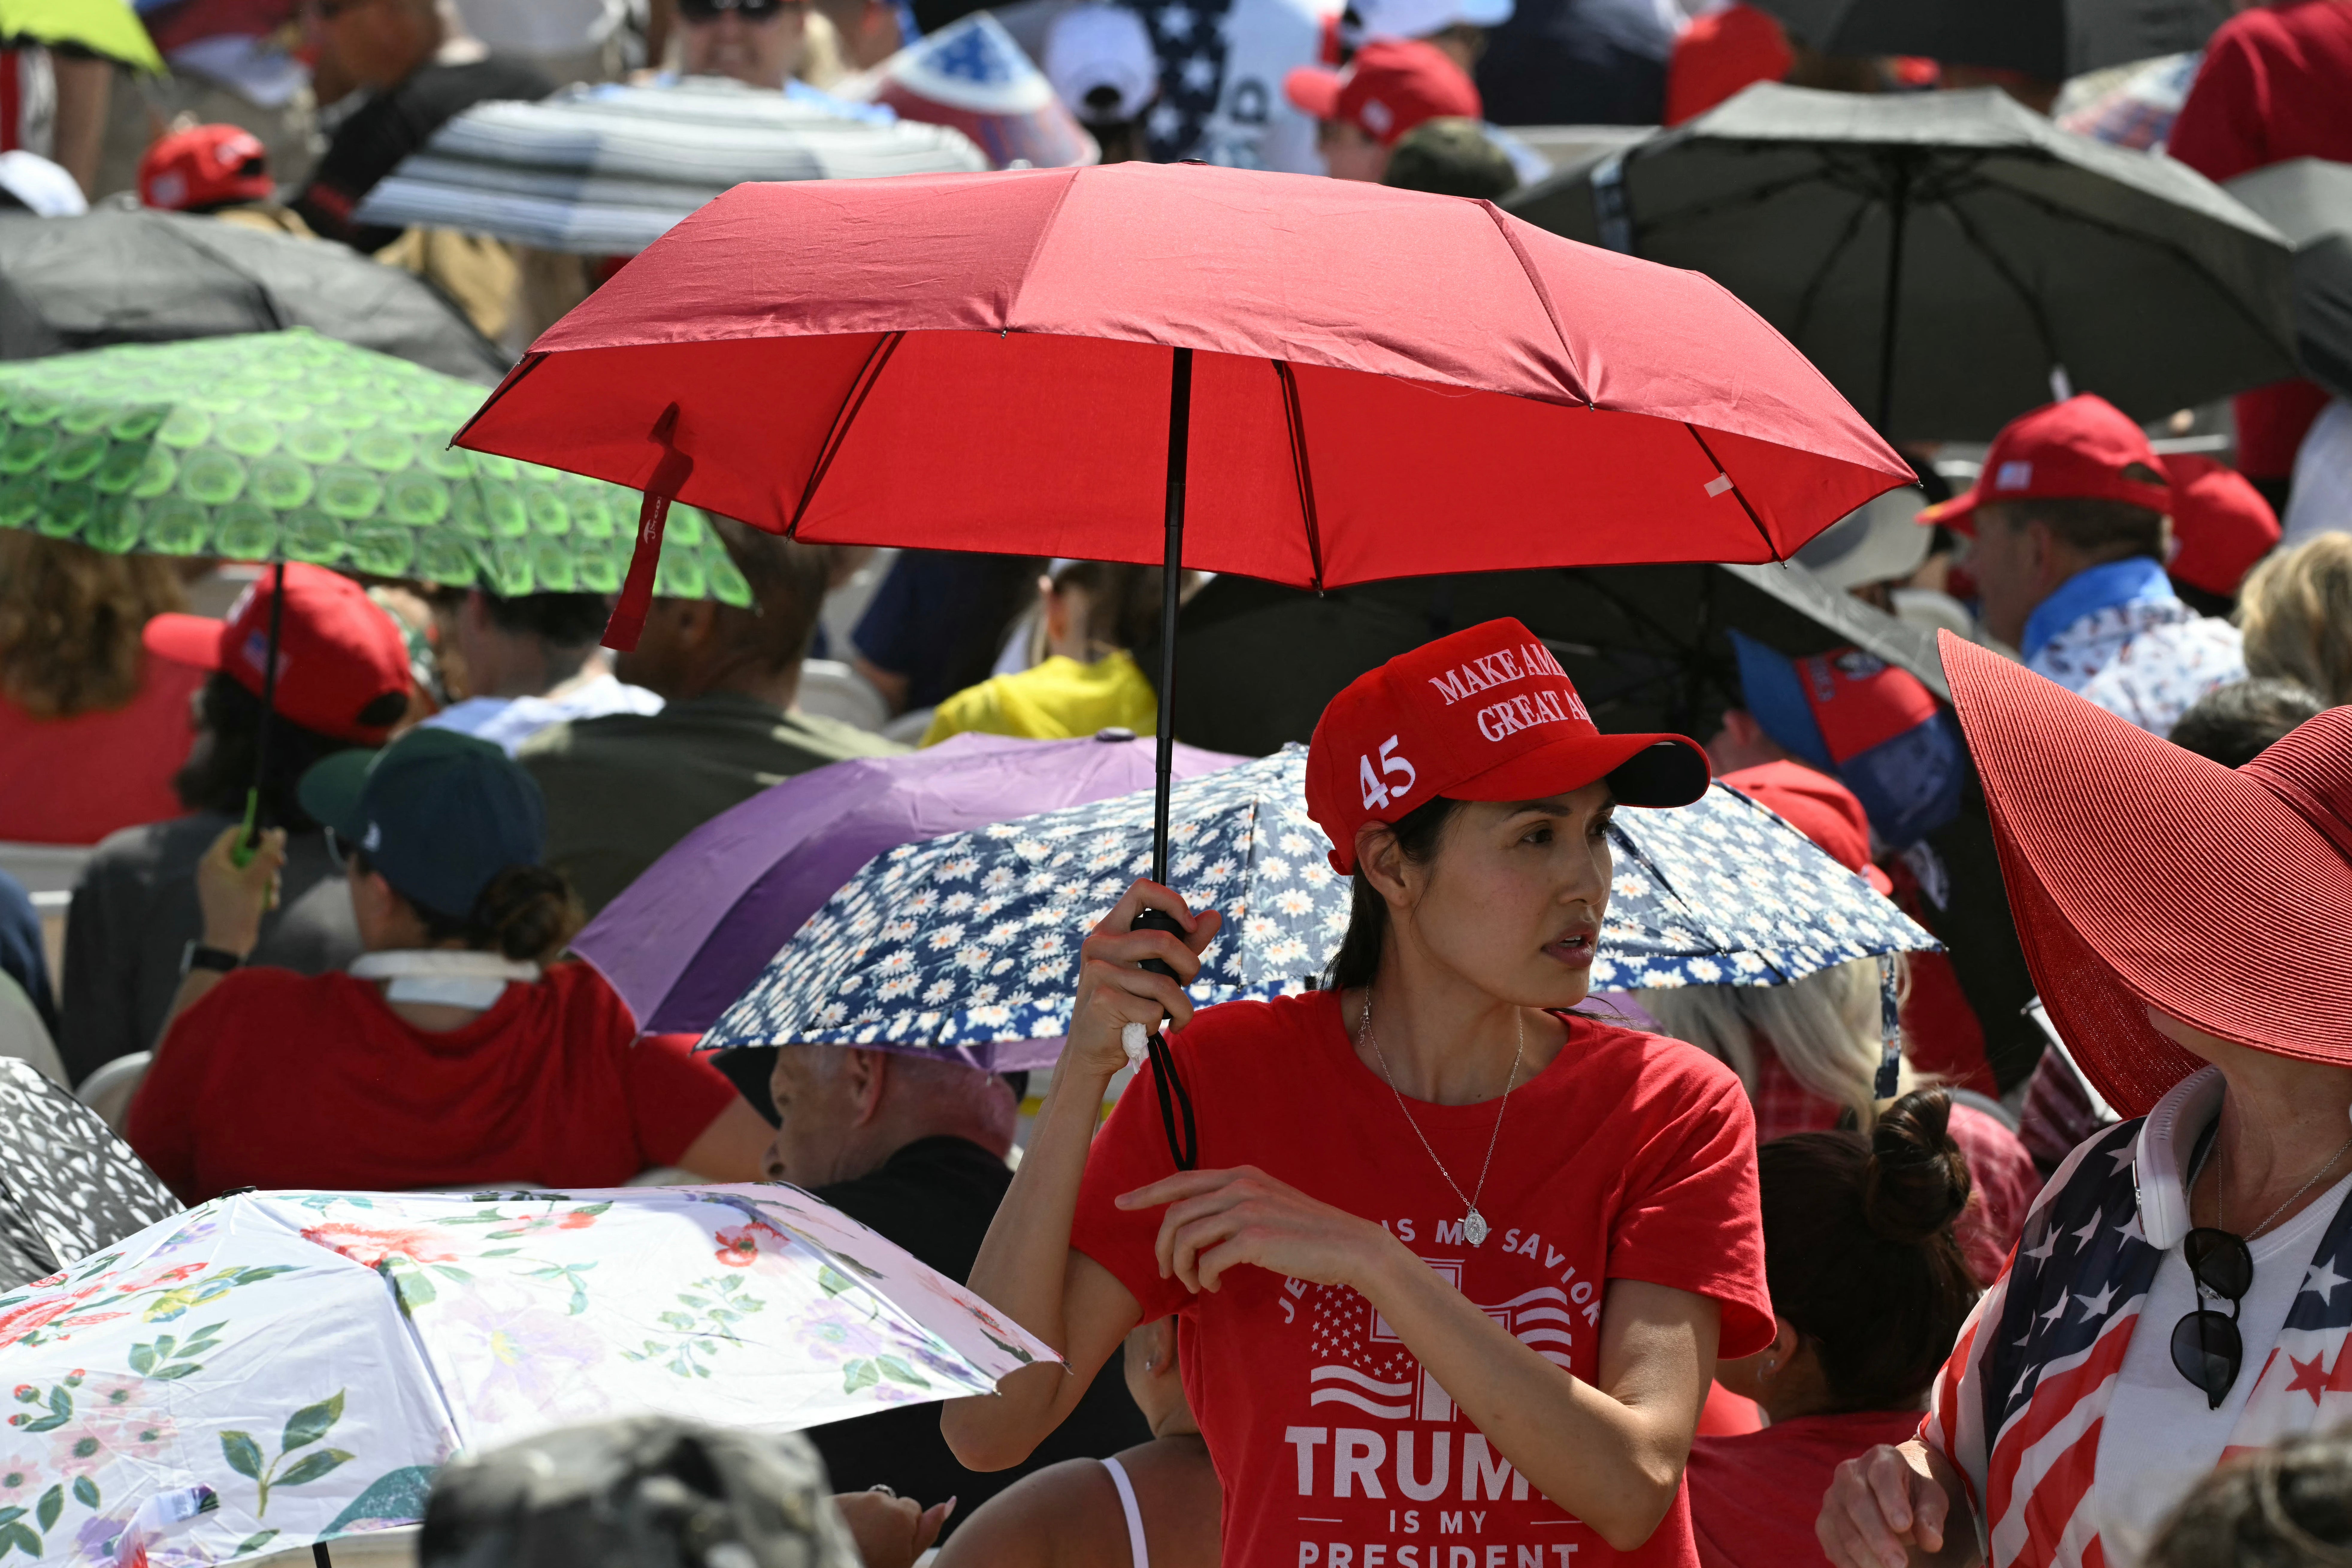 MAGA supporters protect themselves from the sun as they wait for Trump to appear at a rally in Las Vegas